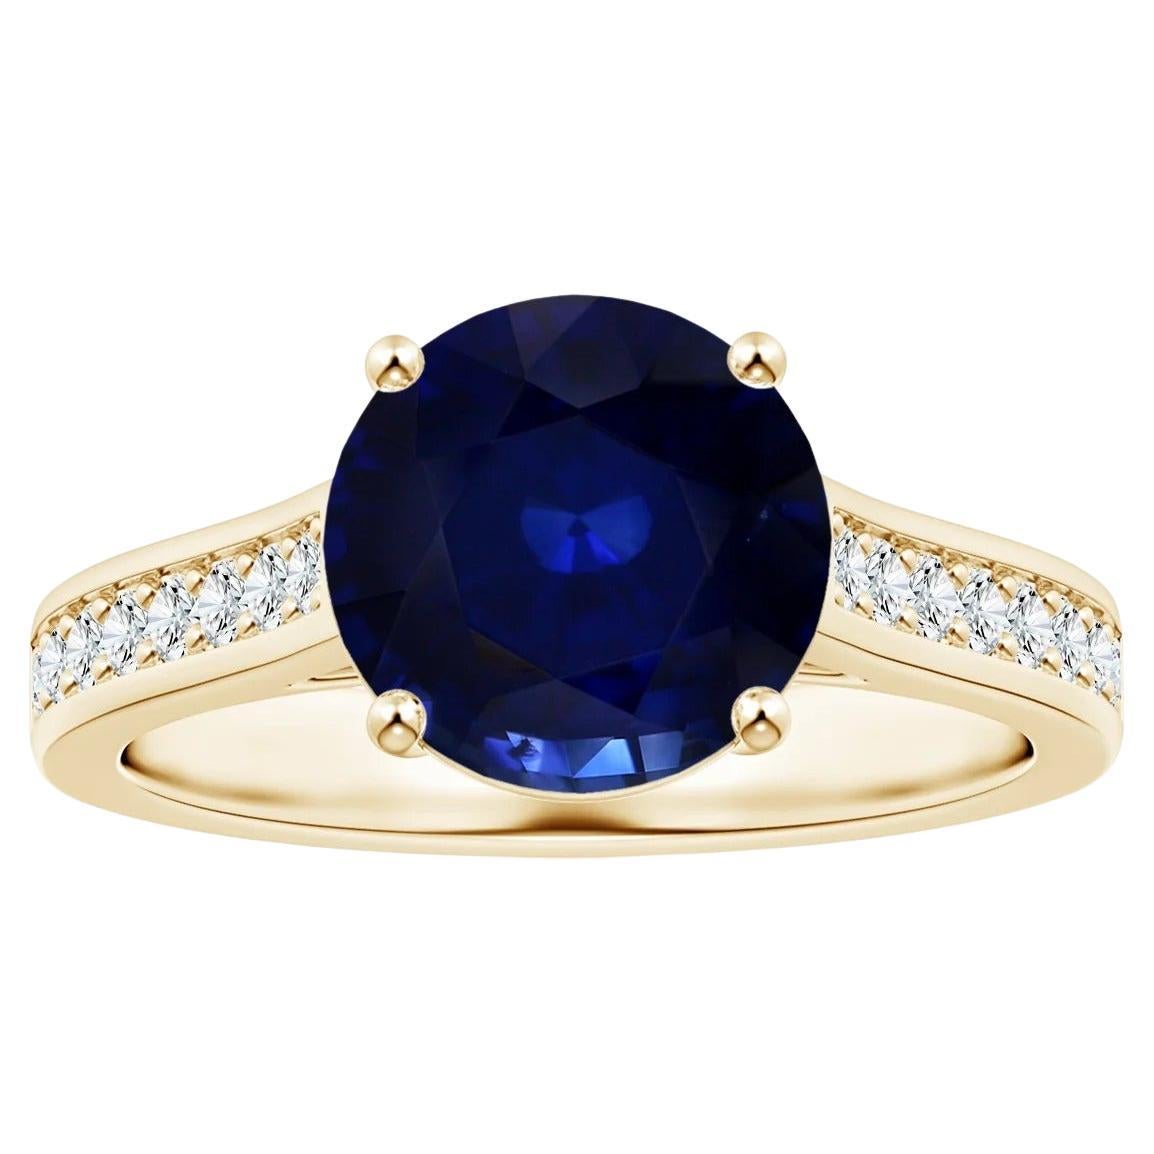 Angara Gia Certified Natural Blue Sapphire Ring in Yellow Gold with Diamonds